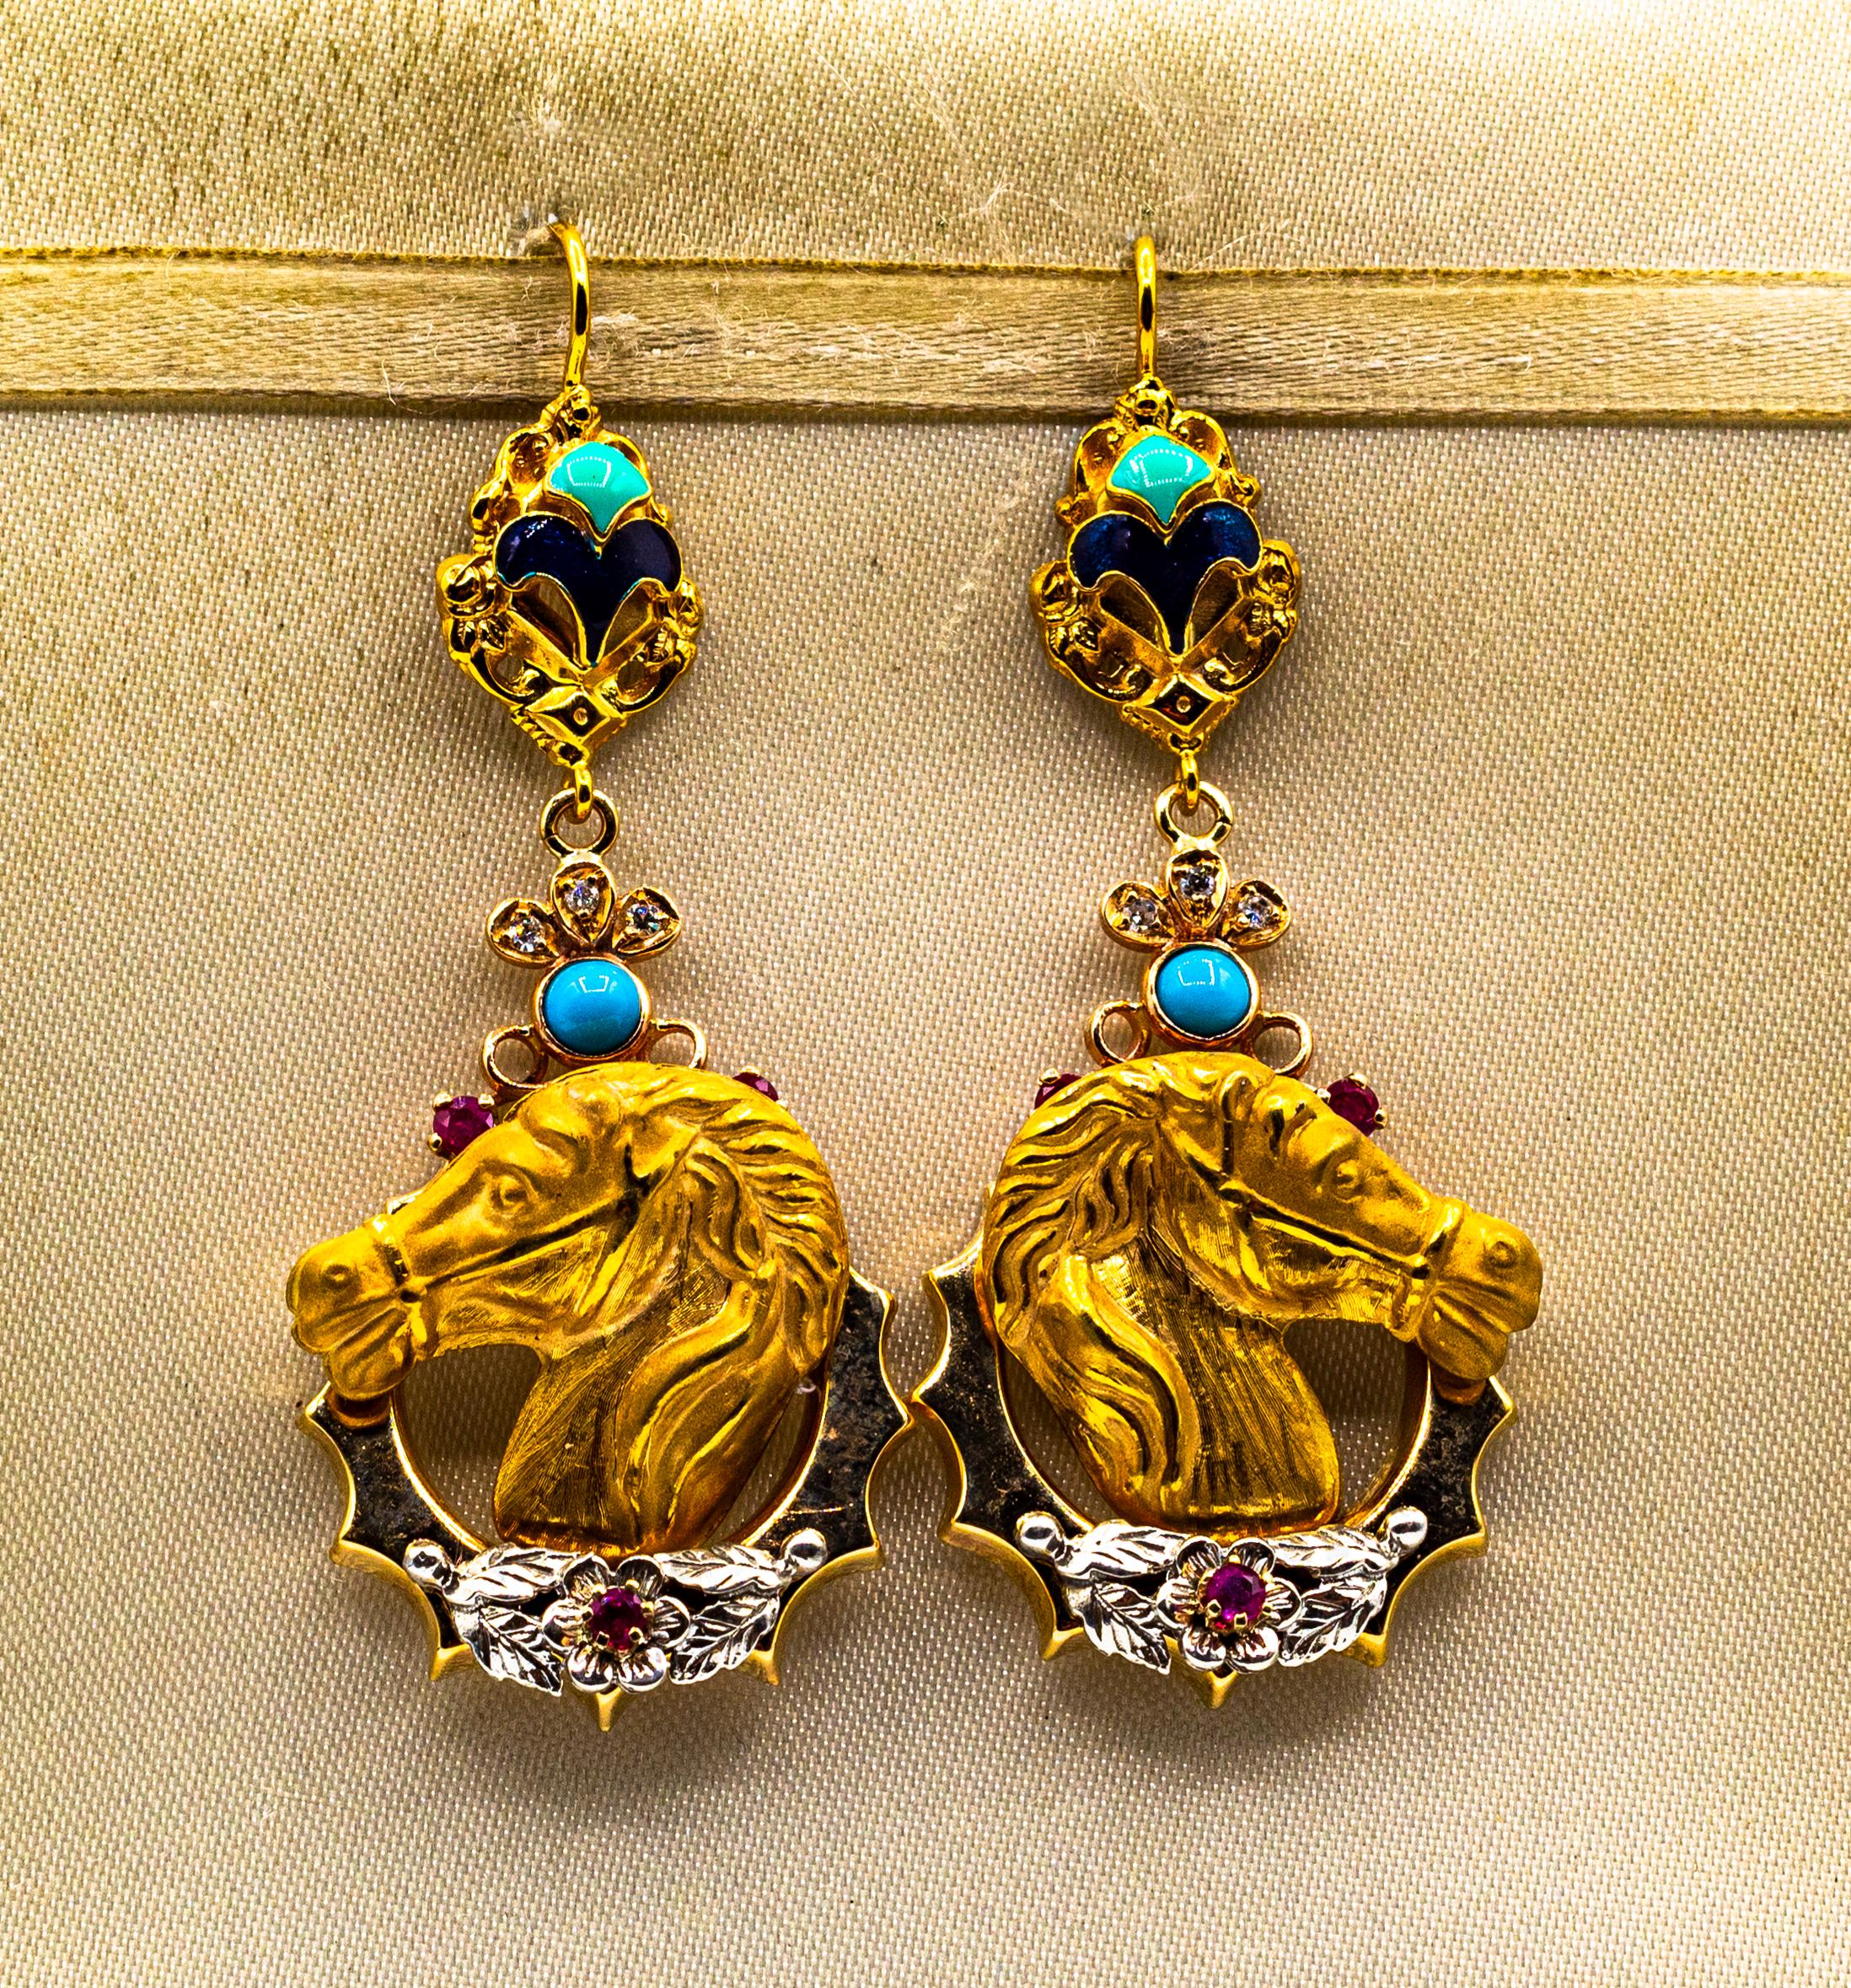 These Earrings are made of 9K Yellow Gold and Sterling Silver.
These Earrings have 0.09 Carats of White Brilliant Cut Diamonds.
These Earrings have 0.80 Carats of Rubies.
These Earrings have Natural Turquoise and Enamel.
These Earrings are inspired